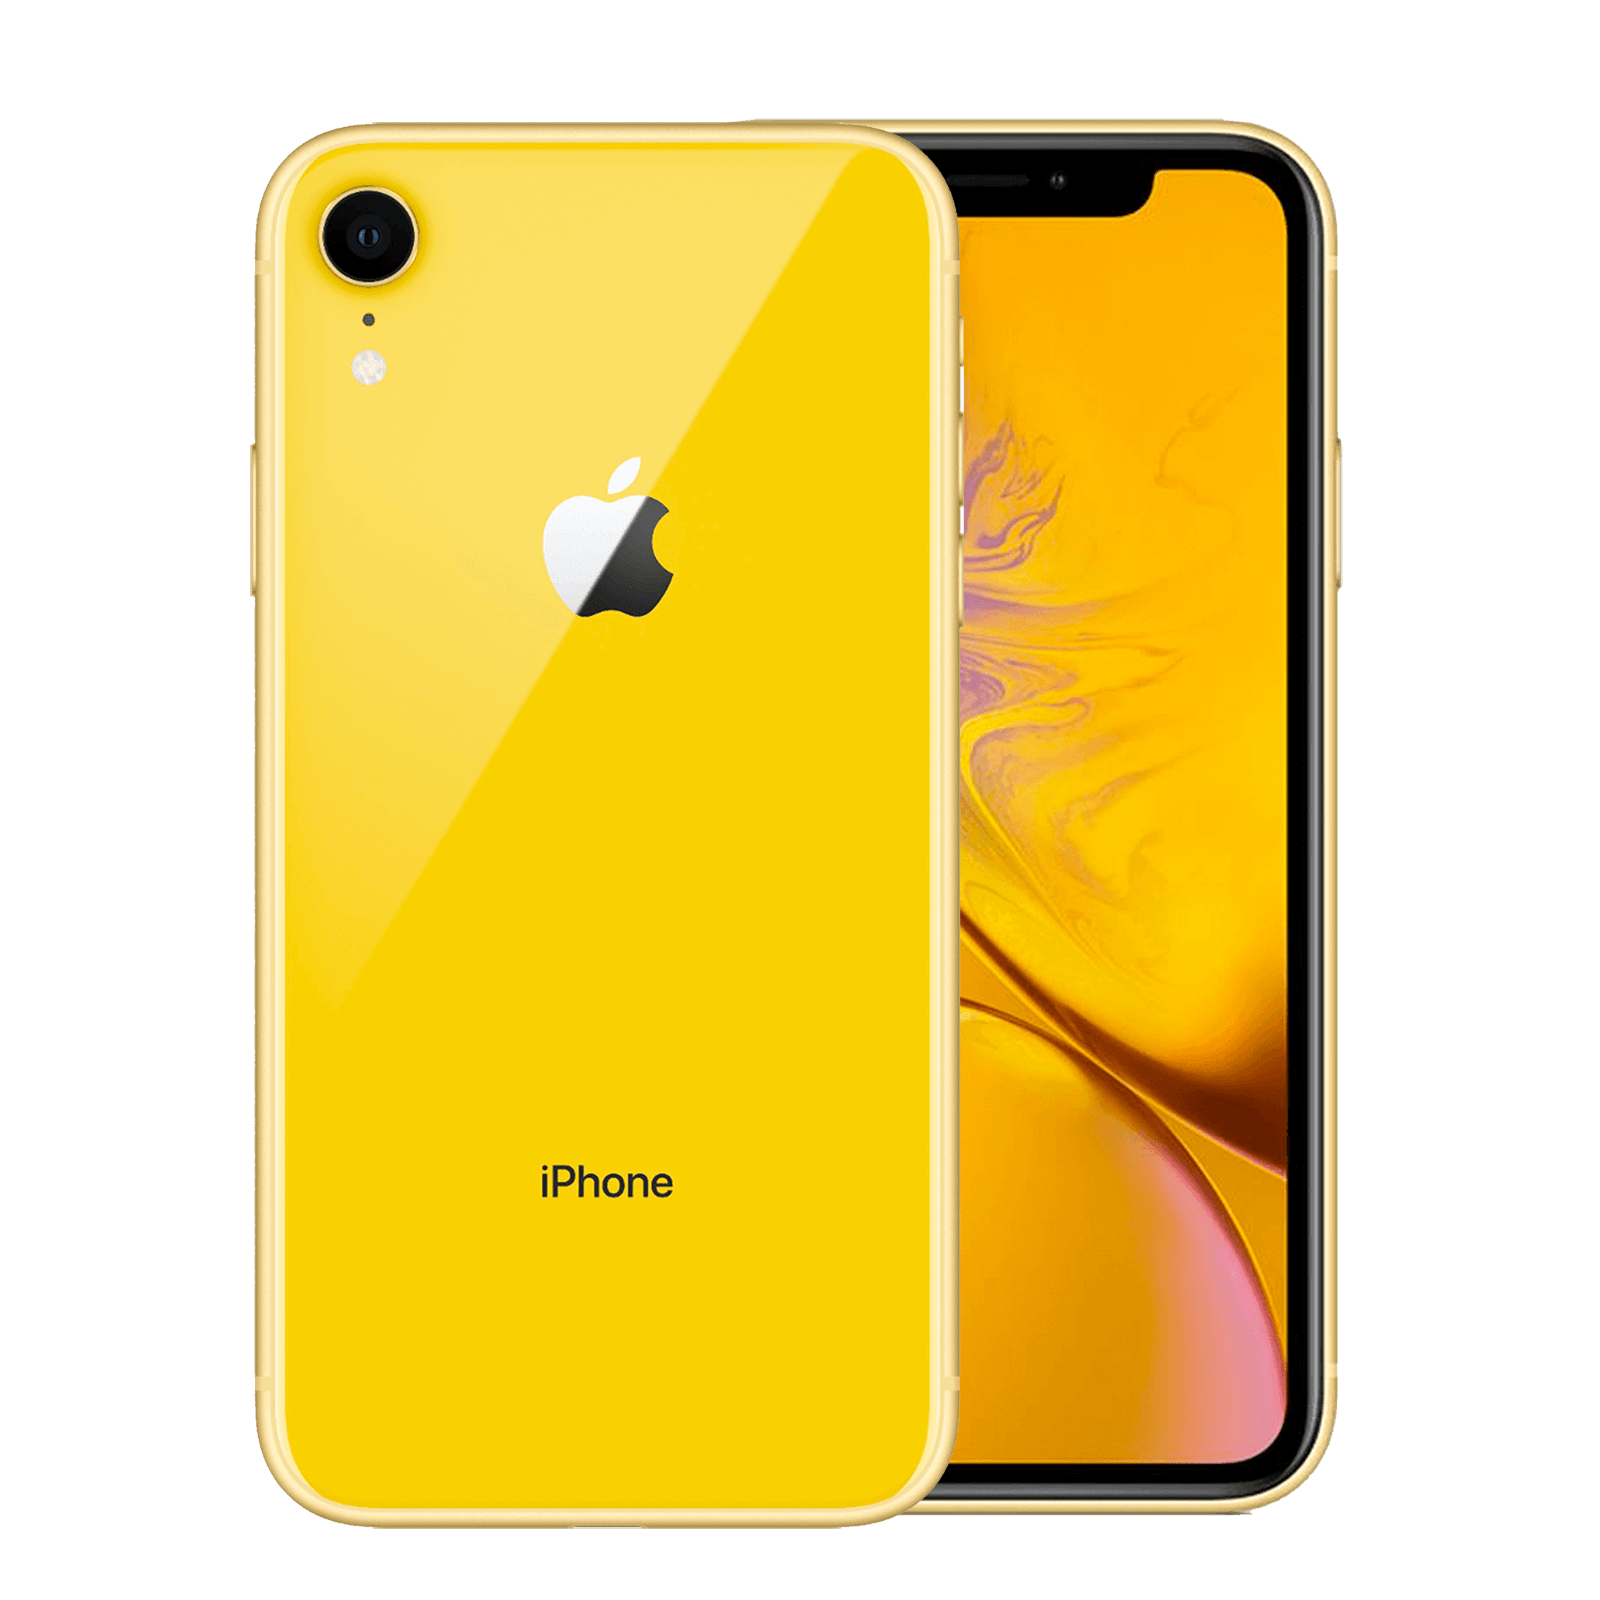 Apple iPhone XR 128GB Yellow Very Good - AT&T